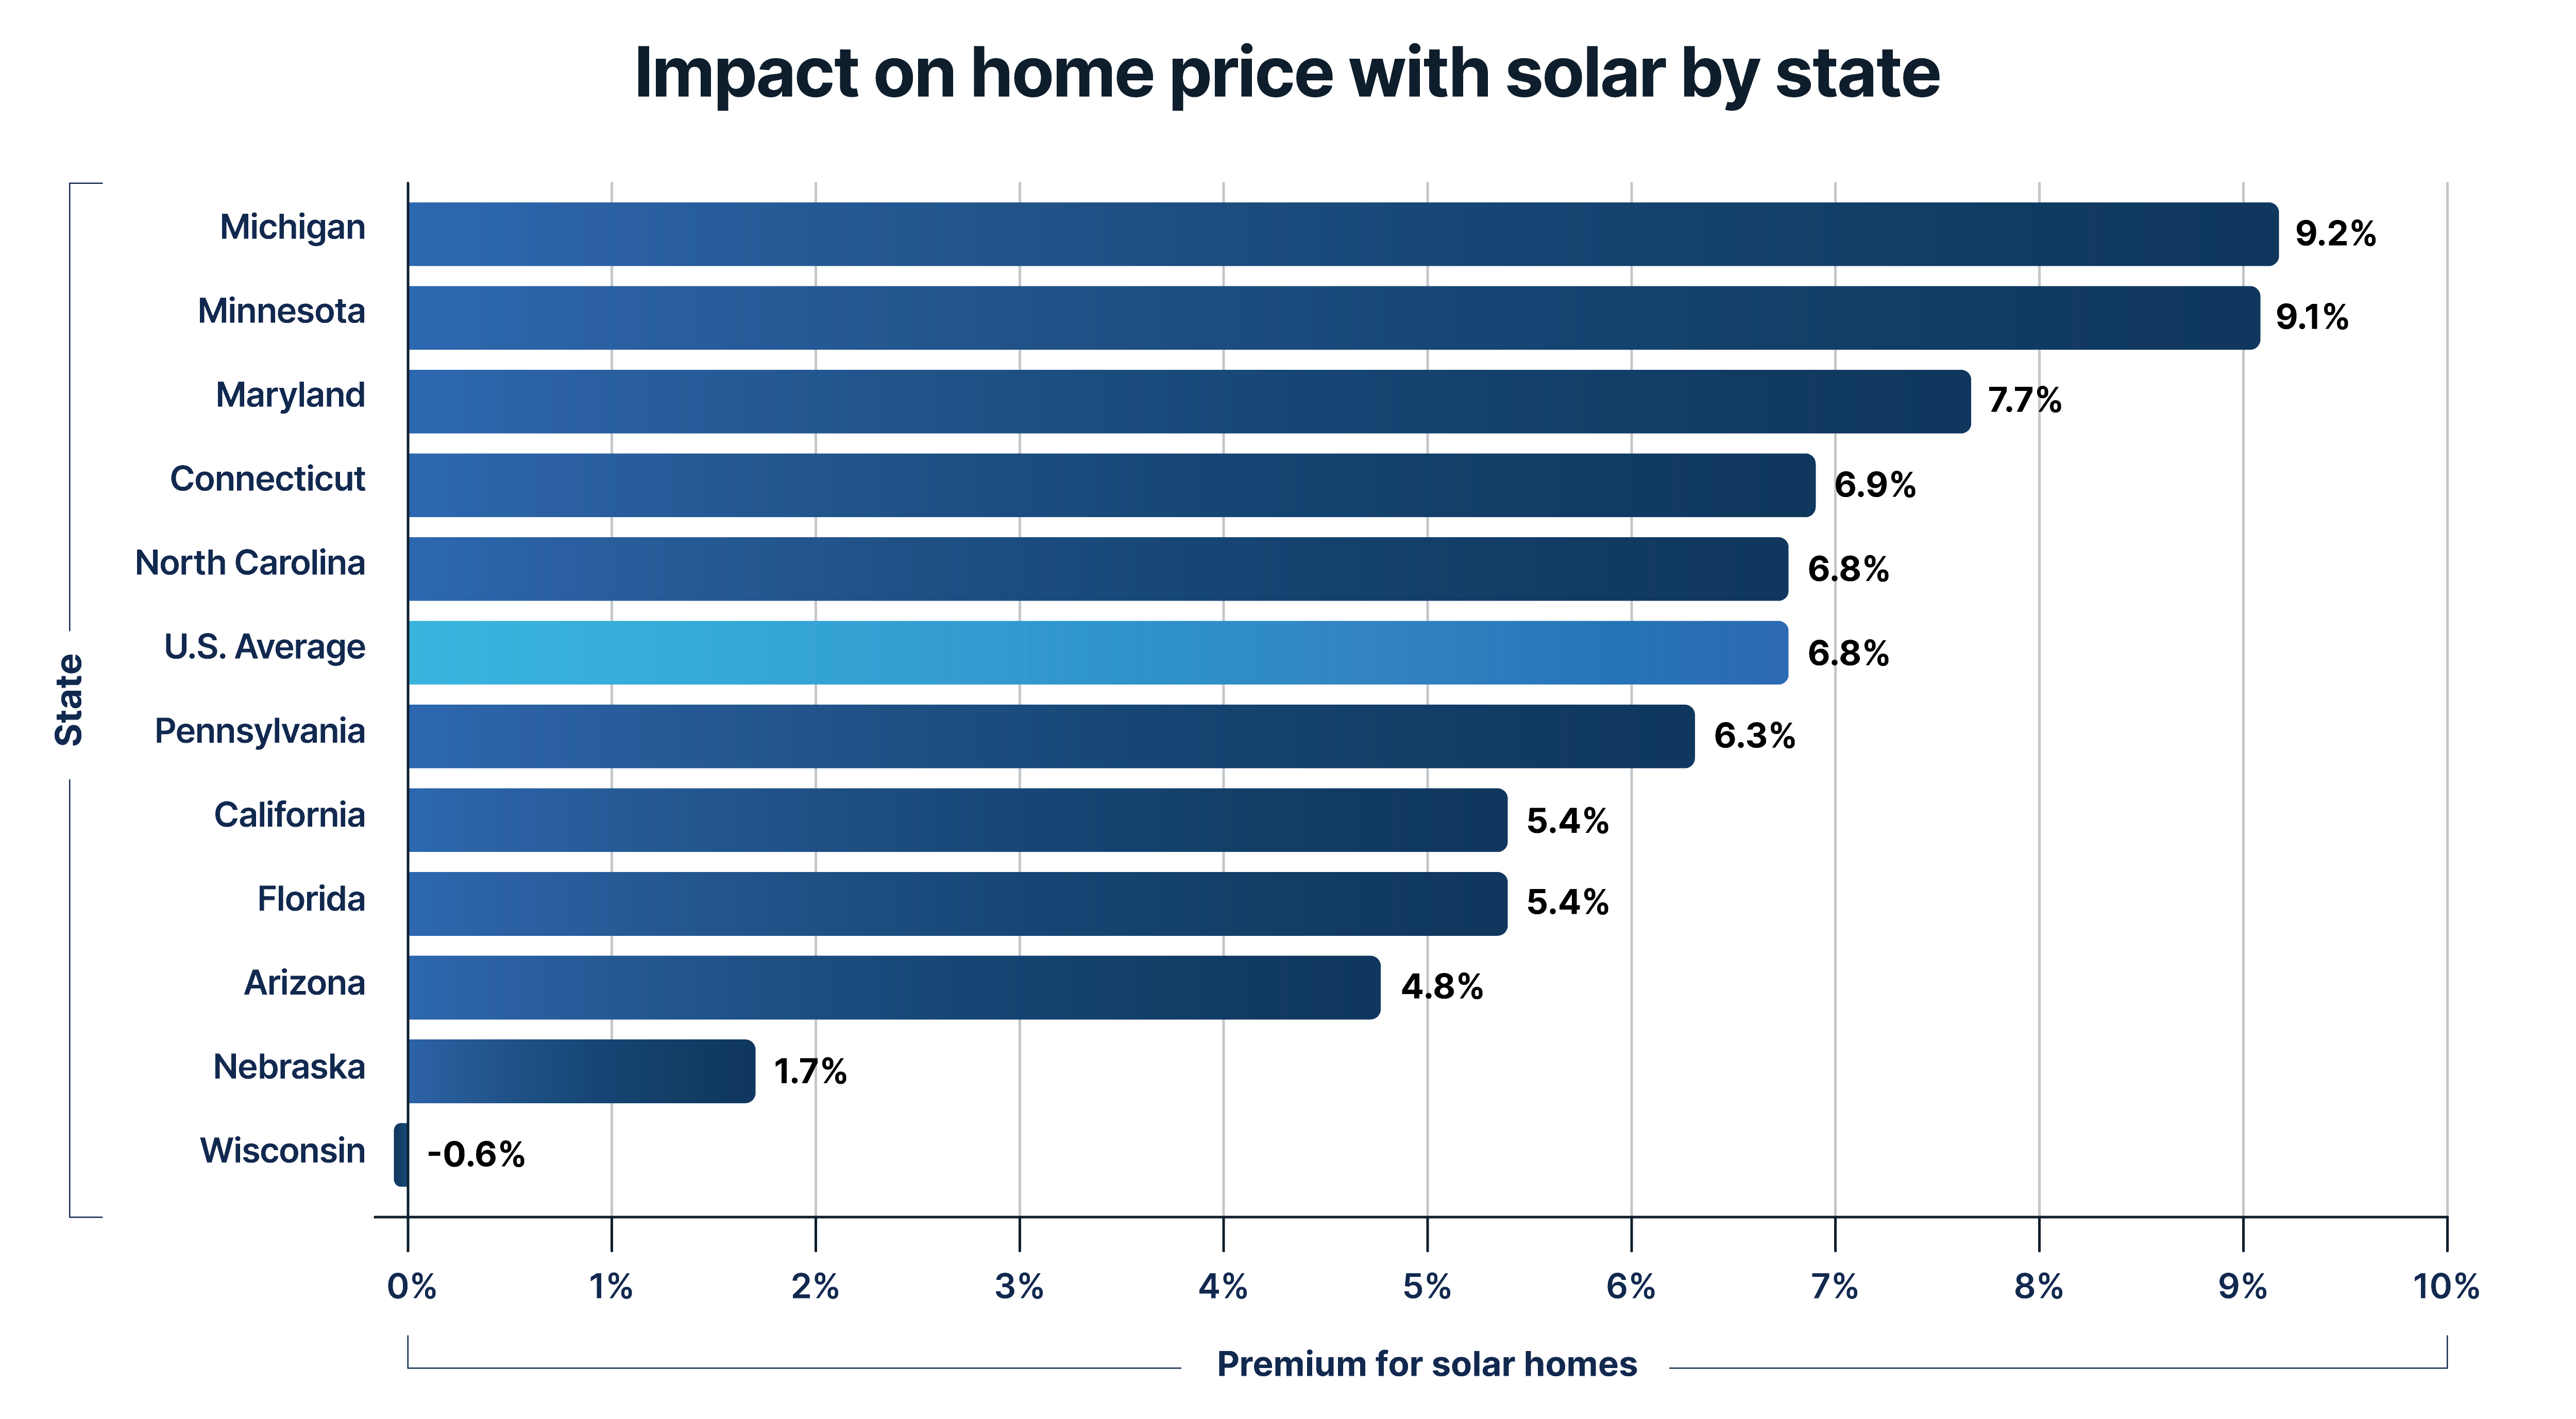 Bar graph comparing the impact solar panels had on home prices between states. Ranging between a -0.6% premium in Wisconsin and 9.2% premium in Michigan. 